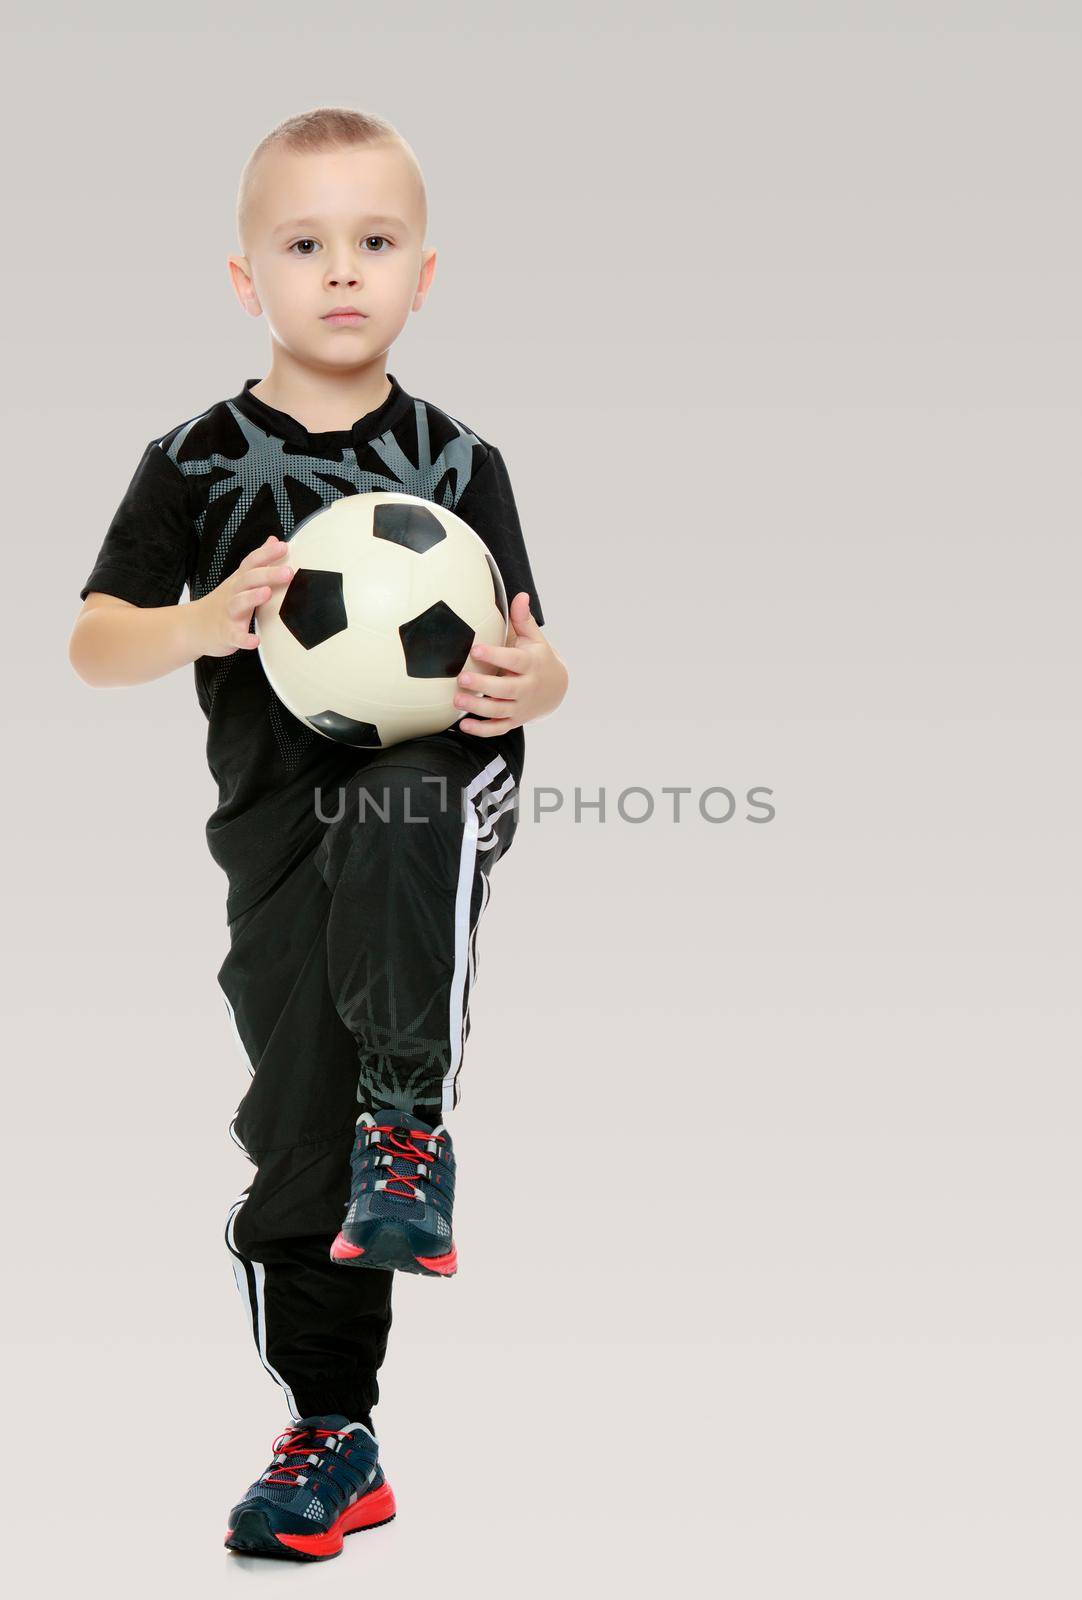 Cute little boy with the ball.He produces the ball with his knee.On a gray background.